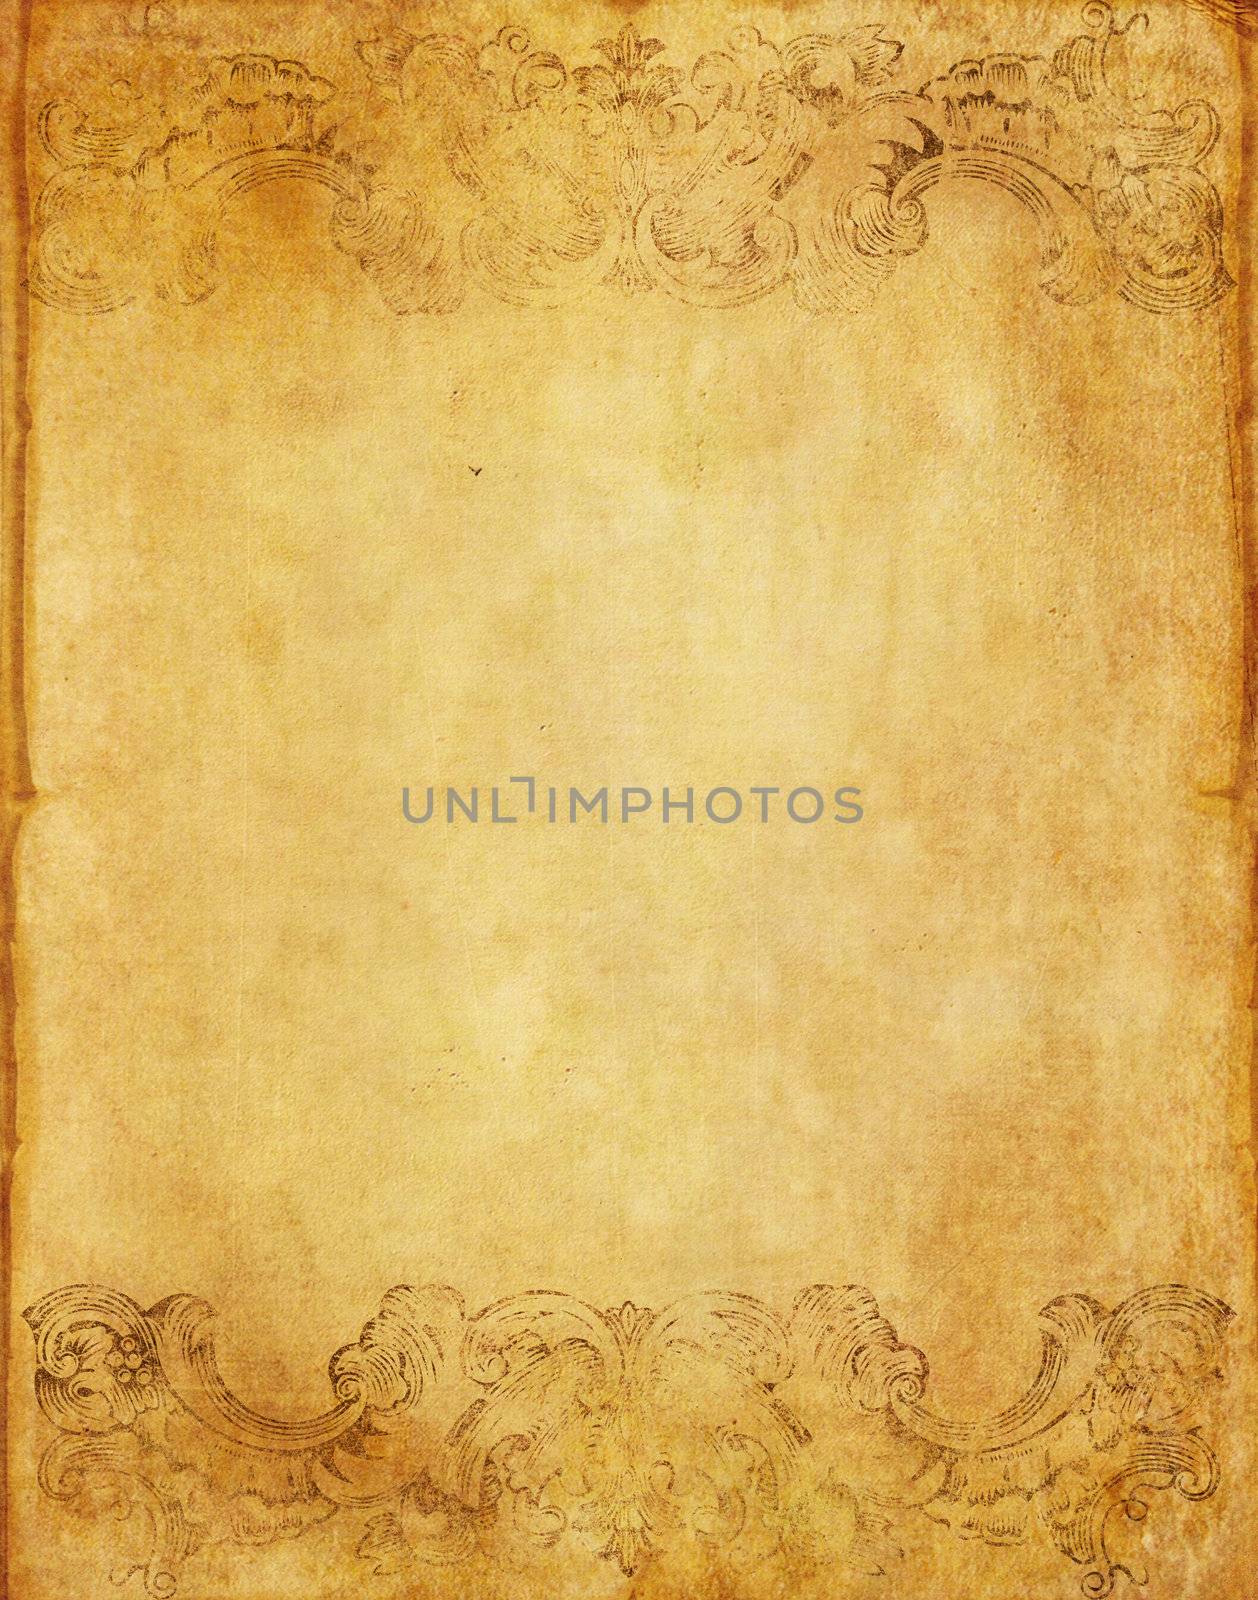 old grunge paper background with vintage victorian style  by nuchylee